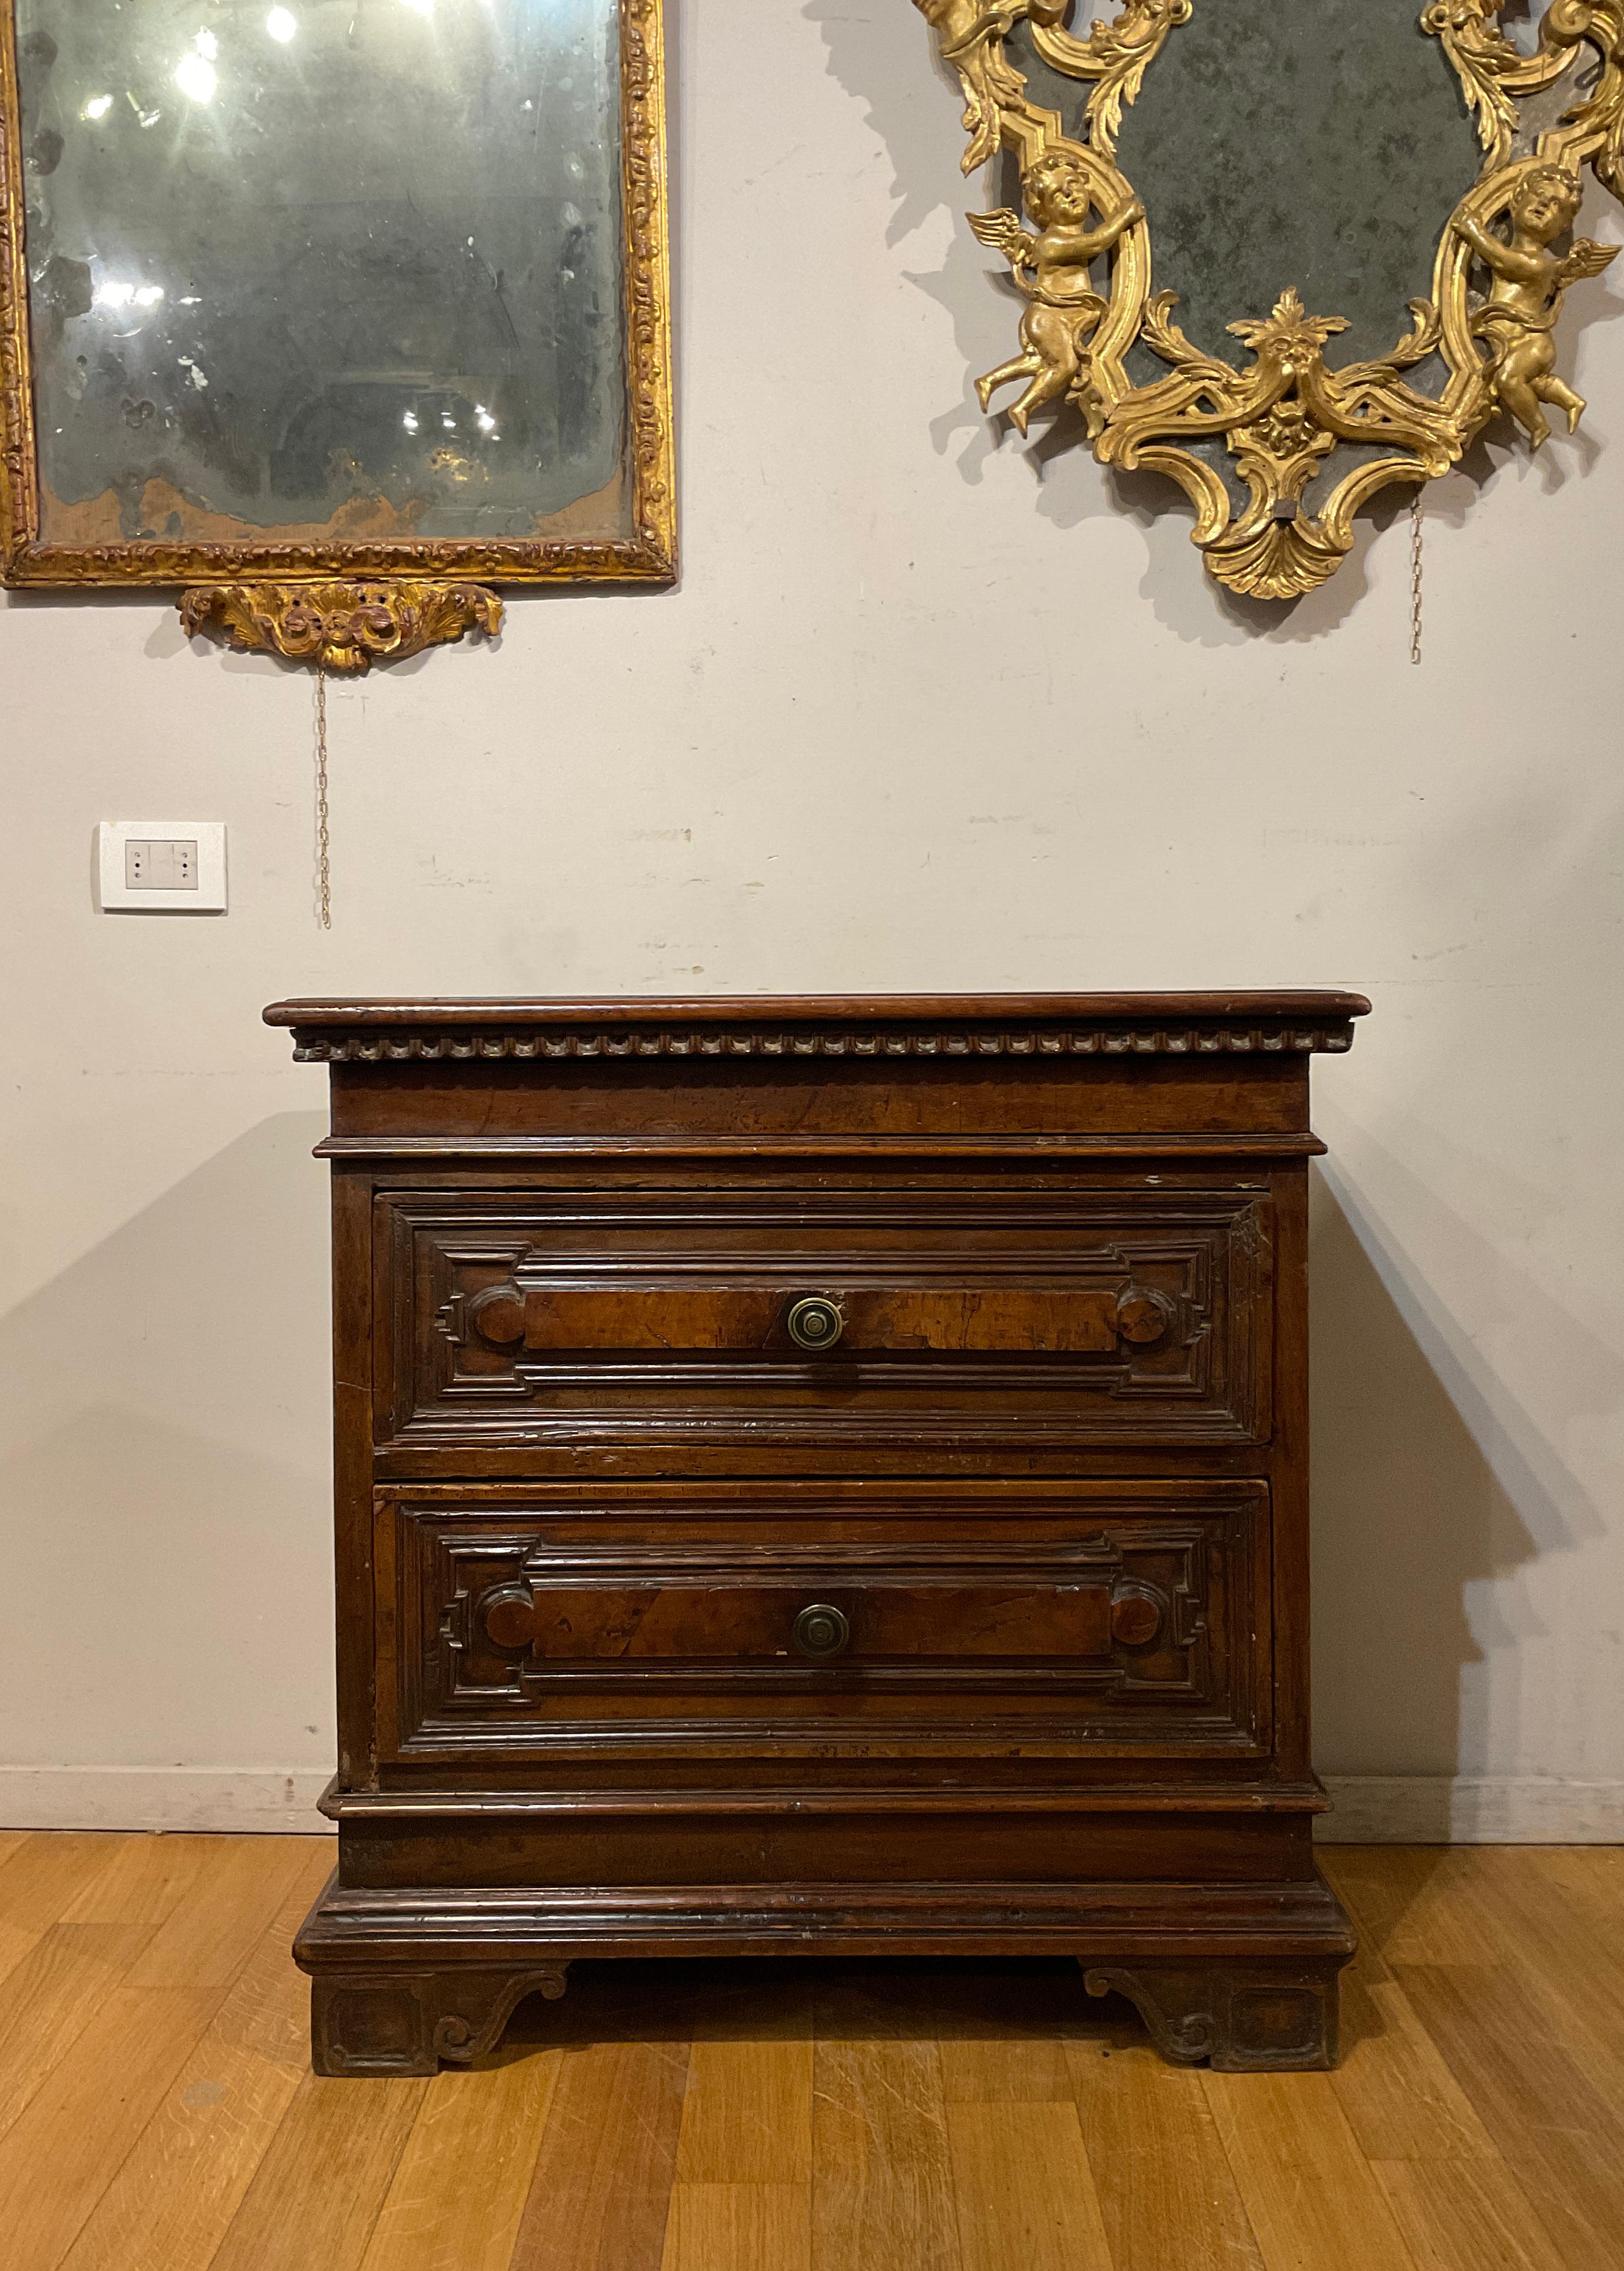 Beautiful walnut chest of drawers with two drawers with bronze knob and a drawer hidden under the top. The drawers are carved to create geometric lozenge motifs, just as under the top the carving recalls classical motifs, characteristics that make